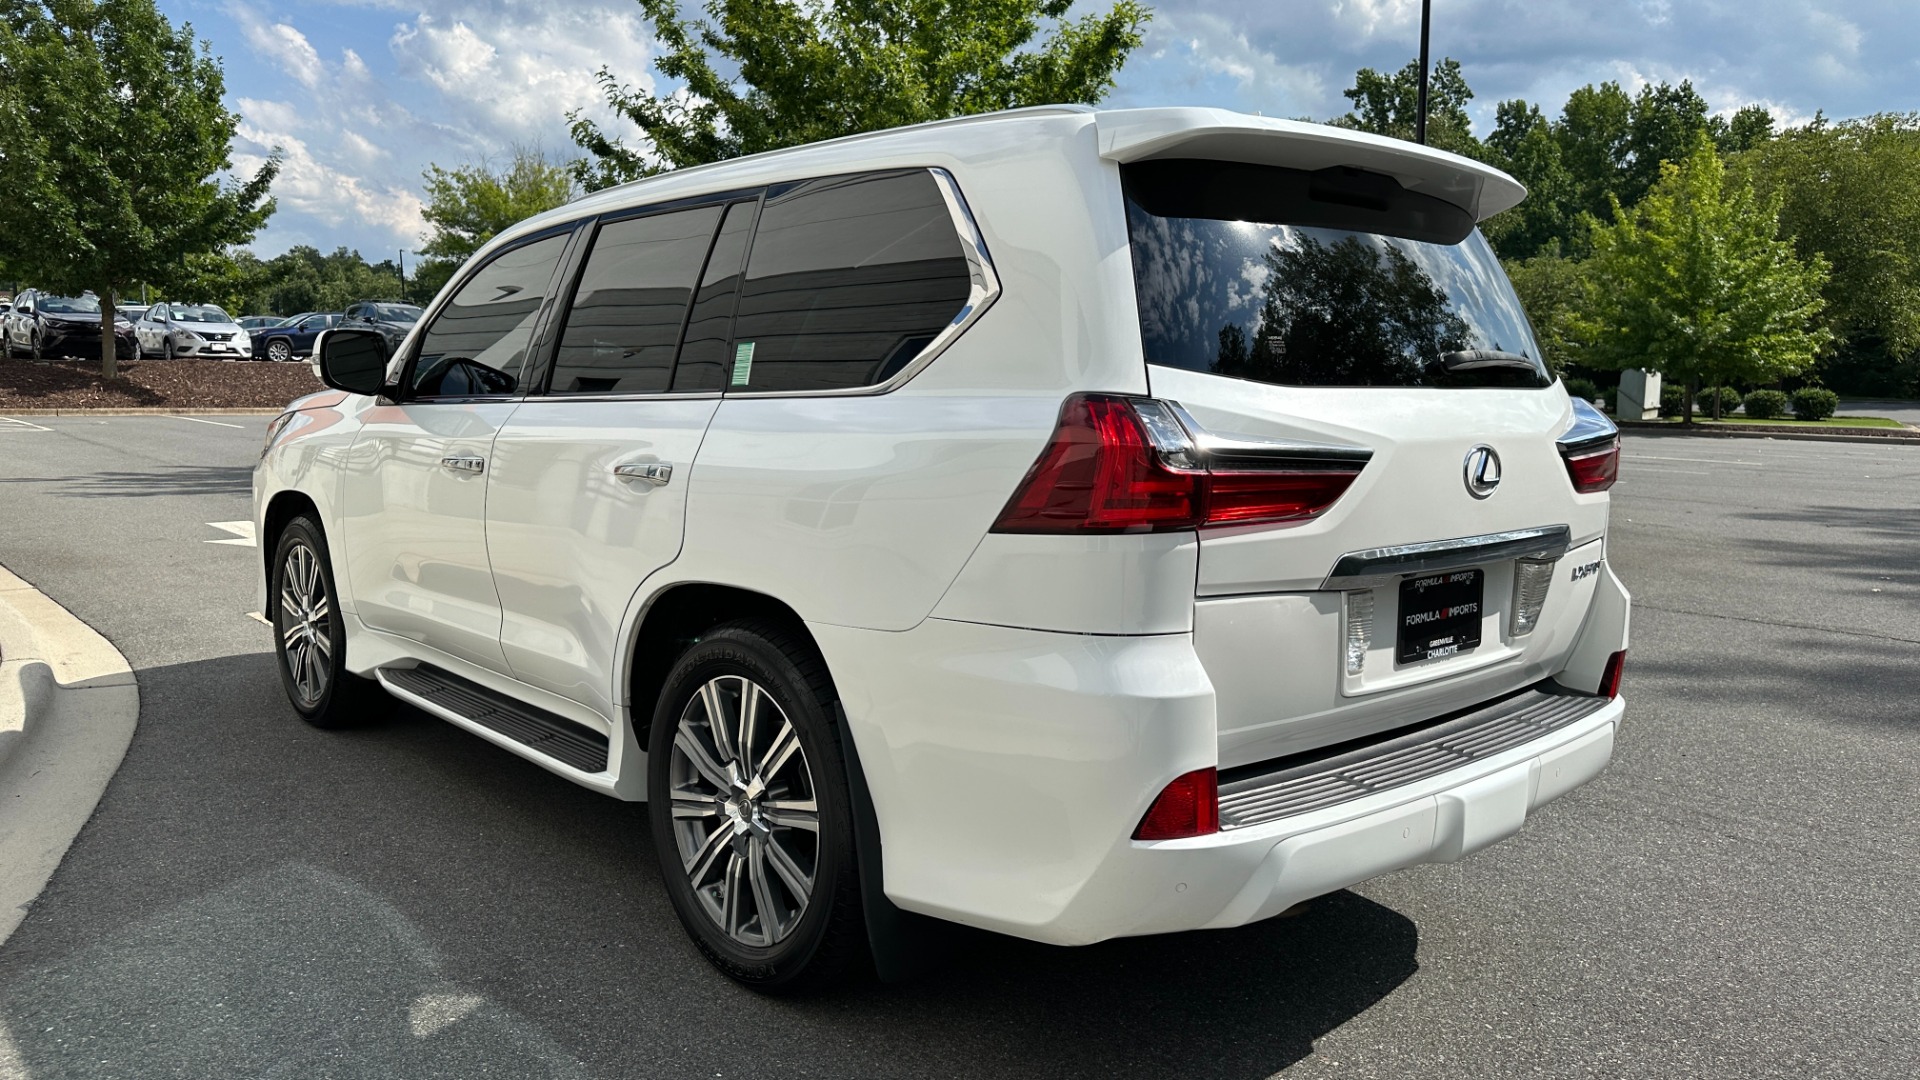 Used 2017 Lexus LX LX 570 LUXURY / MARK LEVINSON / REAR DVD SCREENS / 3 ROW / 4WD for sale $46,995 at Formula Imports in Charlotte NC 28227 7